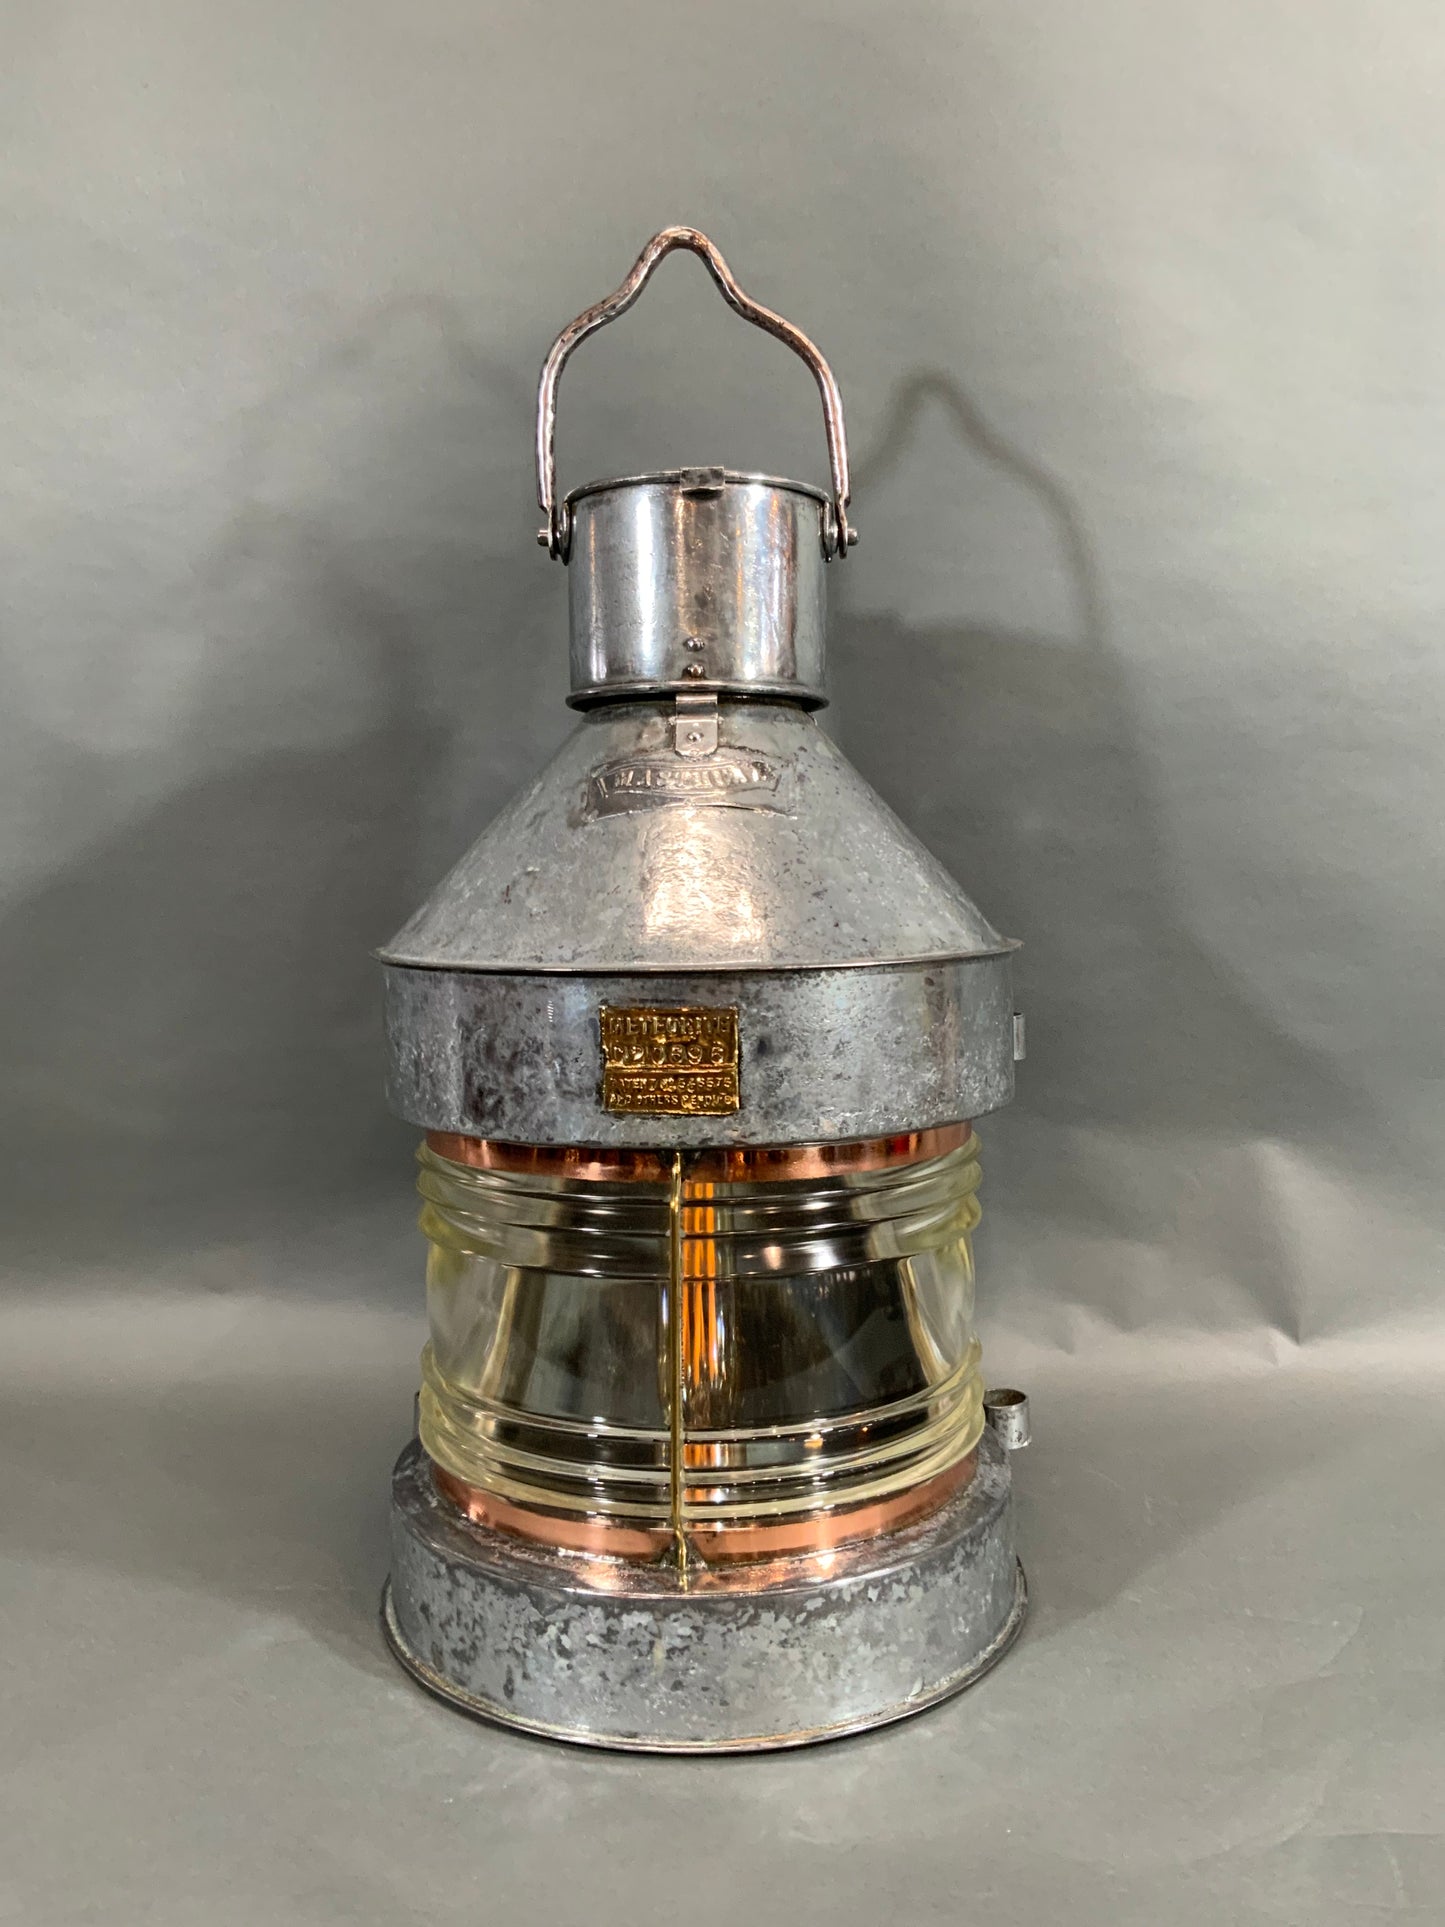 Polished Steel Ship's Masthead Lantern with Fresnel Lens by Meteorite "C20696" - Lannan Gallery